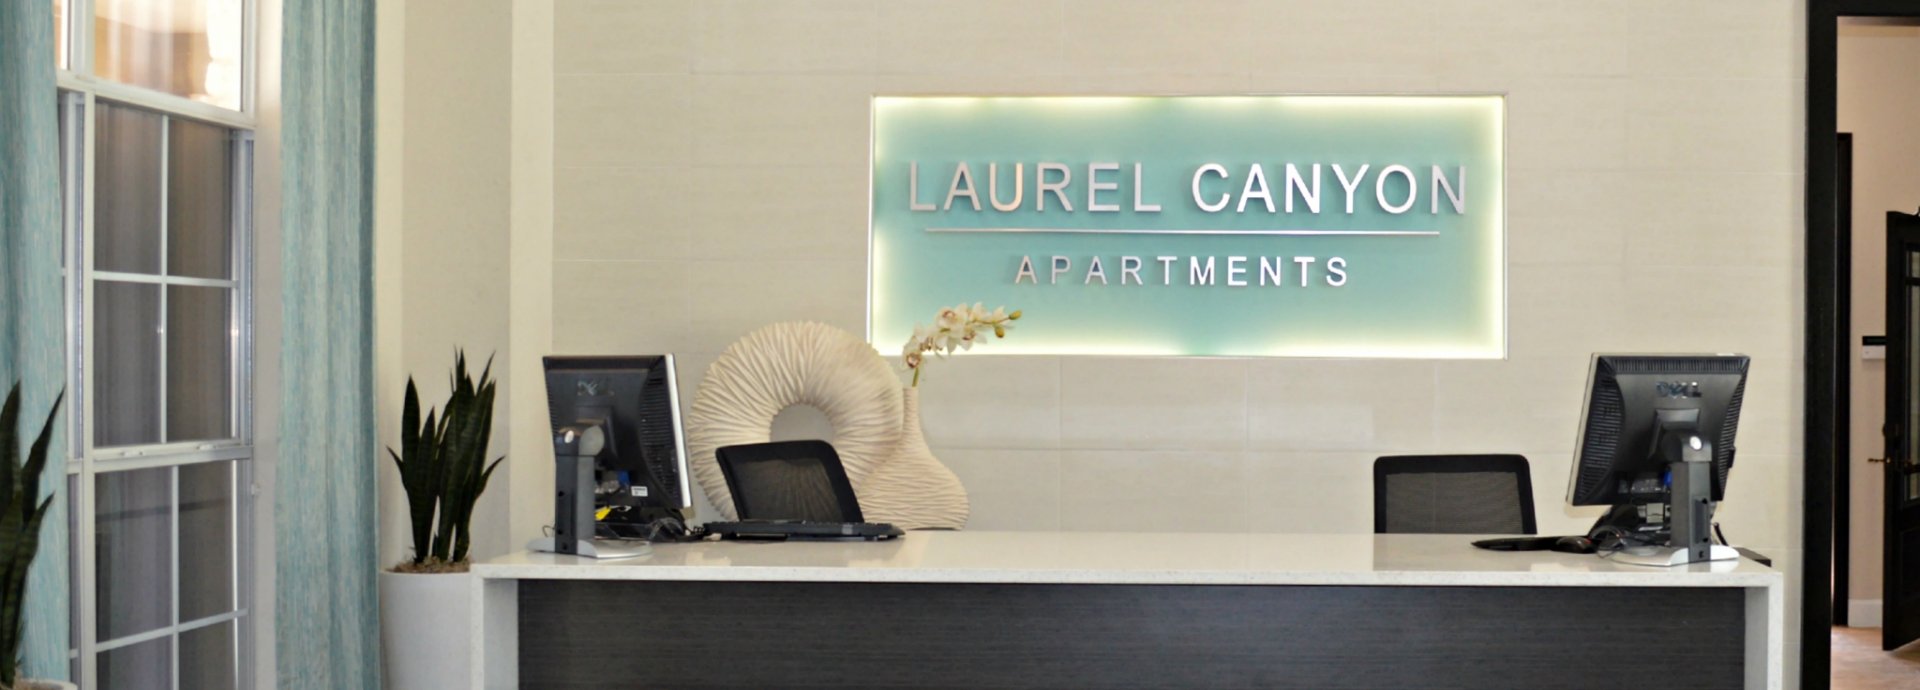 Need more pictures of Apartments Canyon Laurel like this for 2016